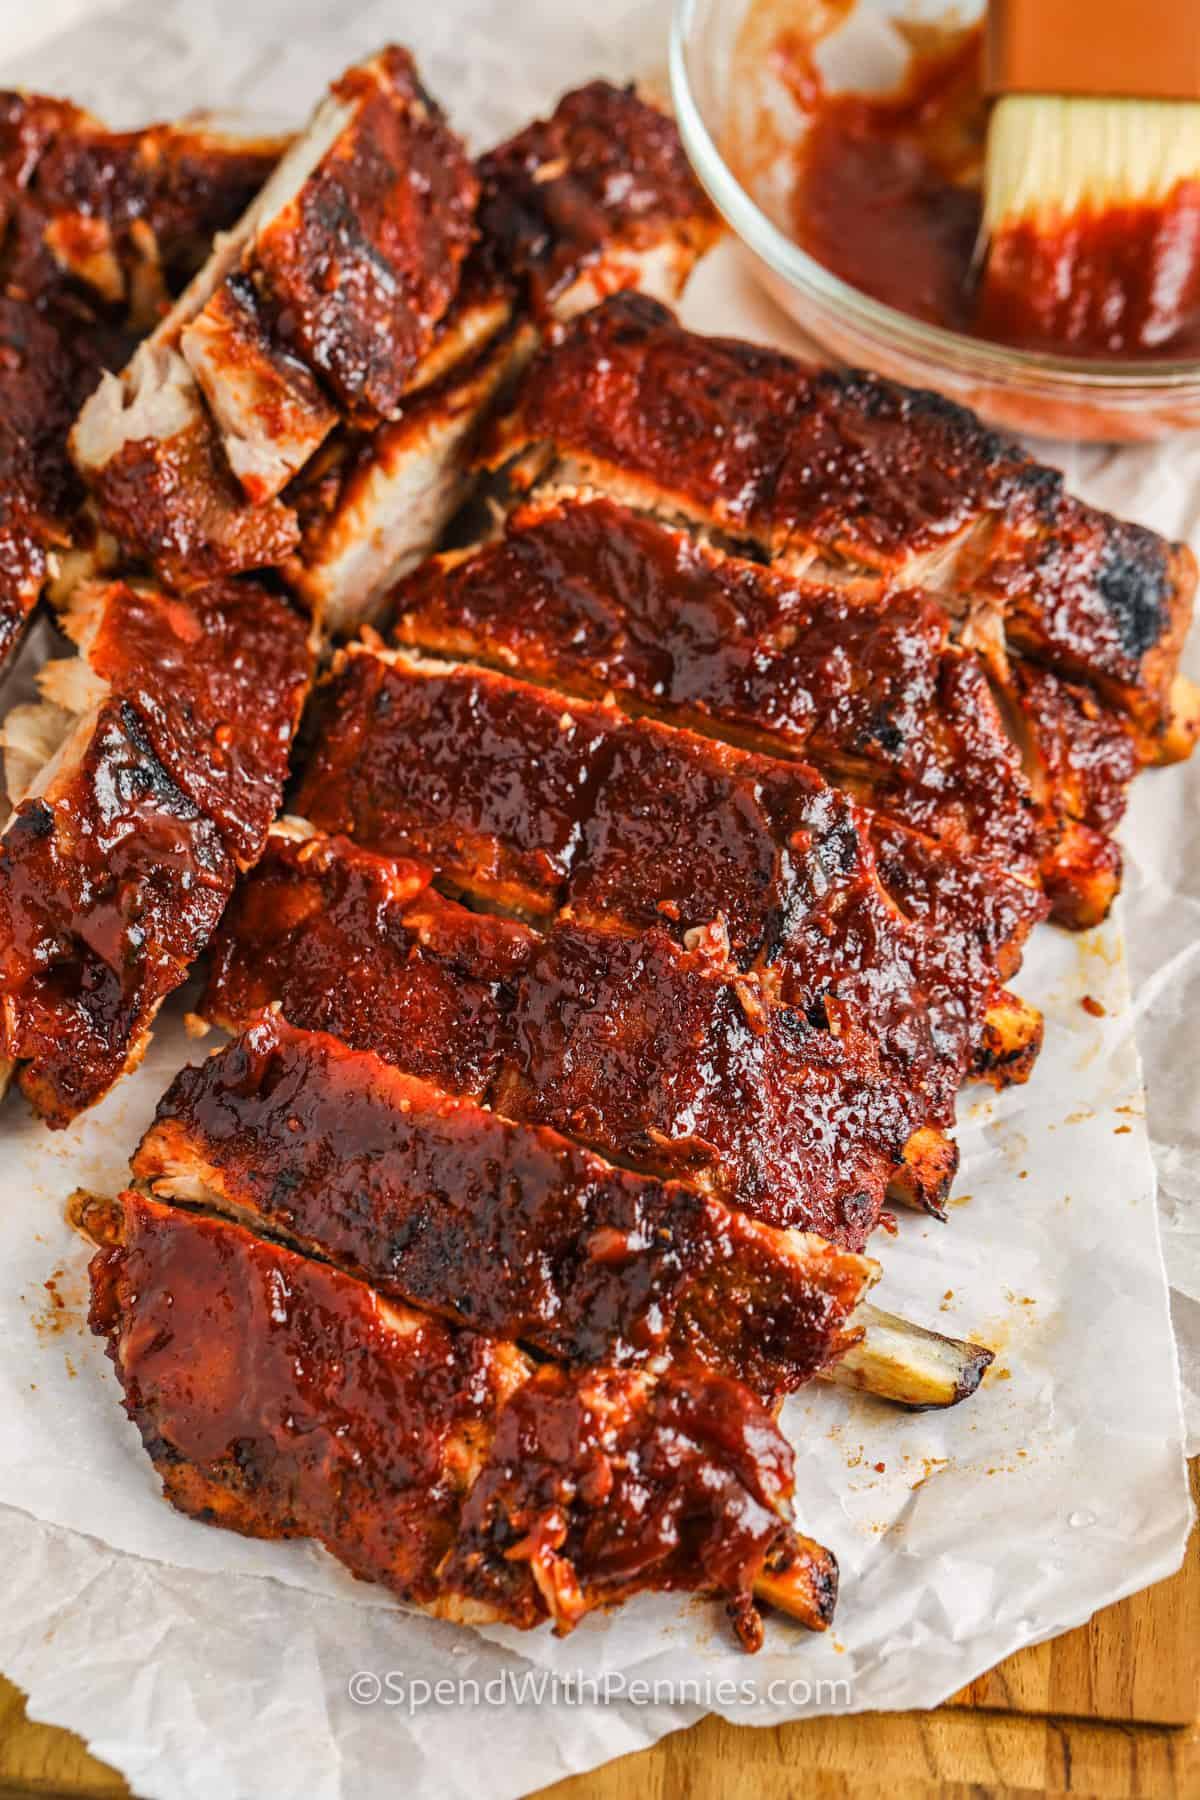 Ribs: Quick, Tender, and Delicious Every Time